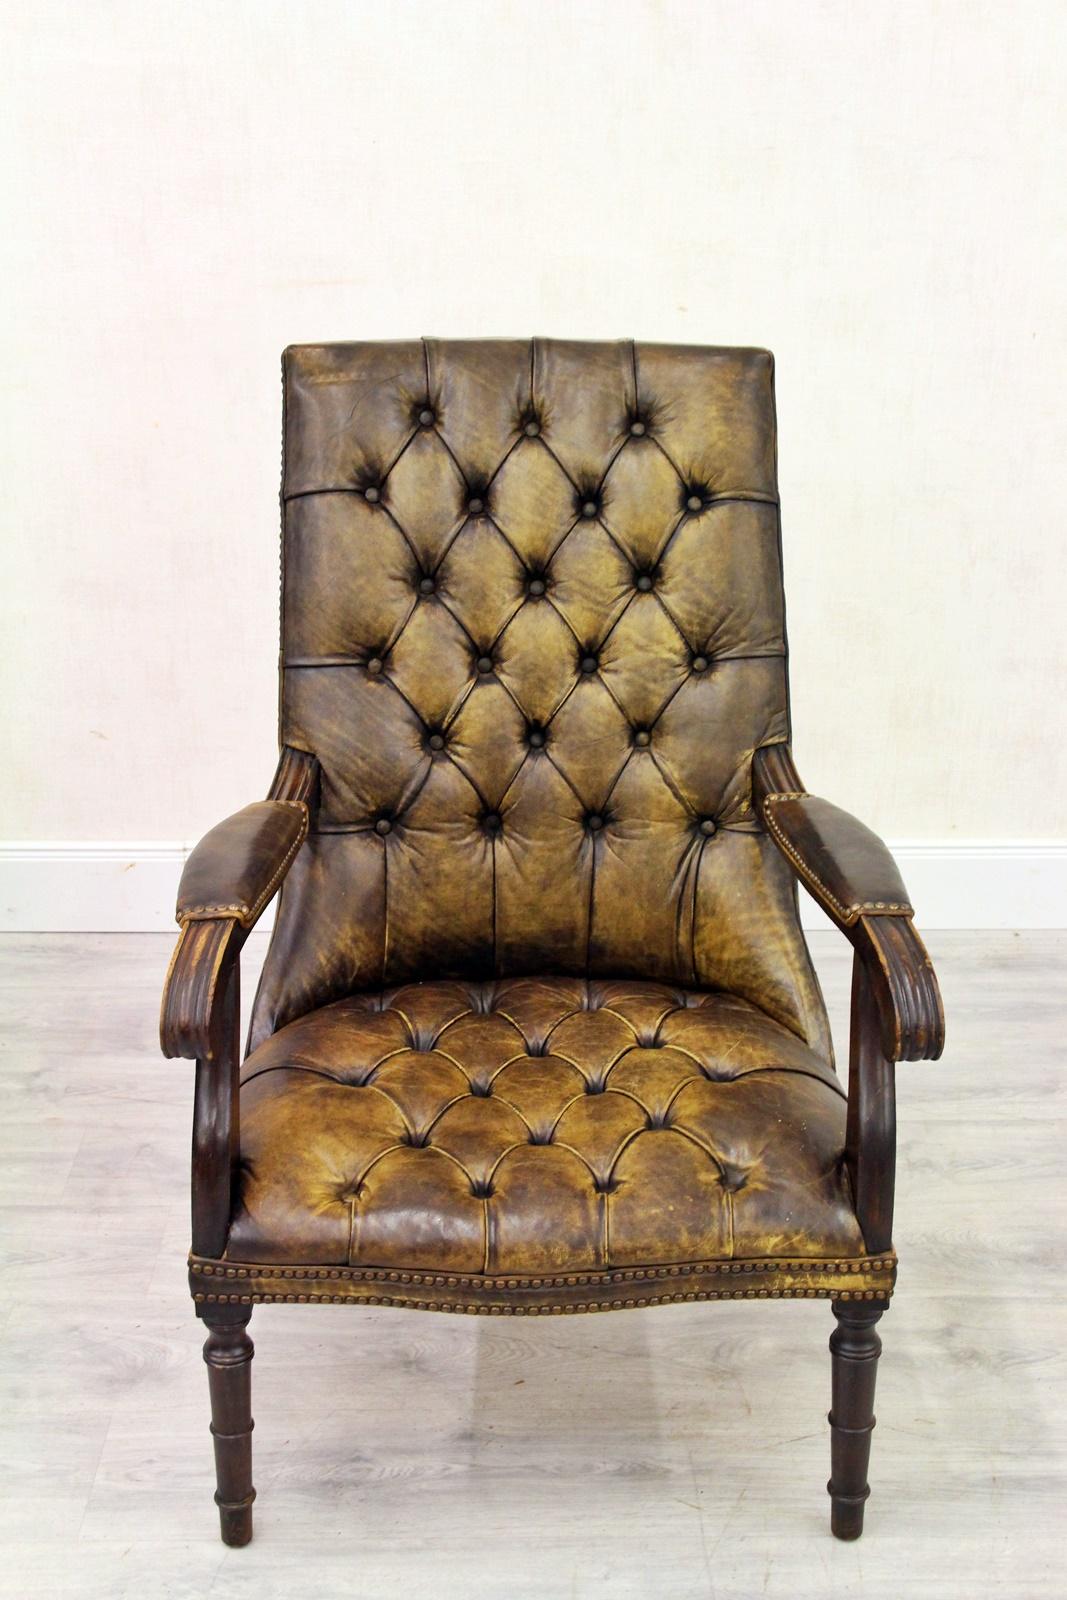 2 Chesterfield Chippendale Wing Chair Armchair Baroque Antique In Good Condition For Sale In Lage, DE